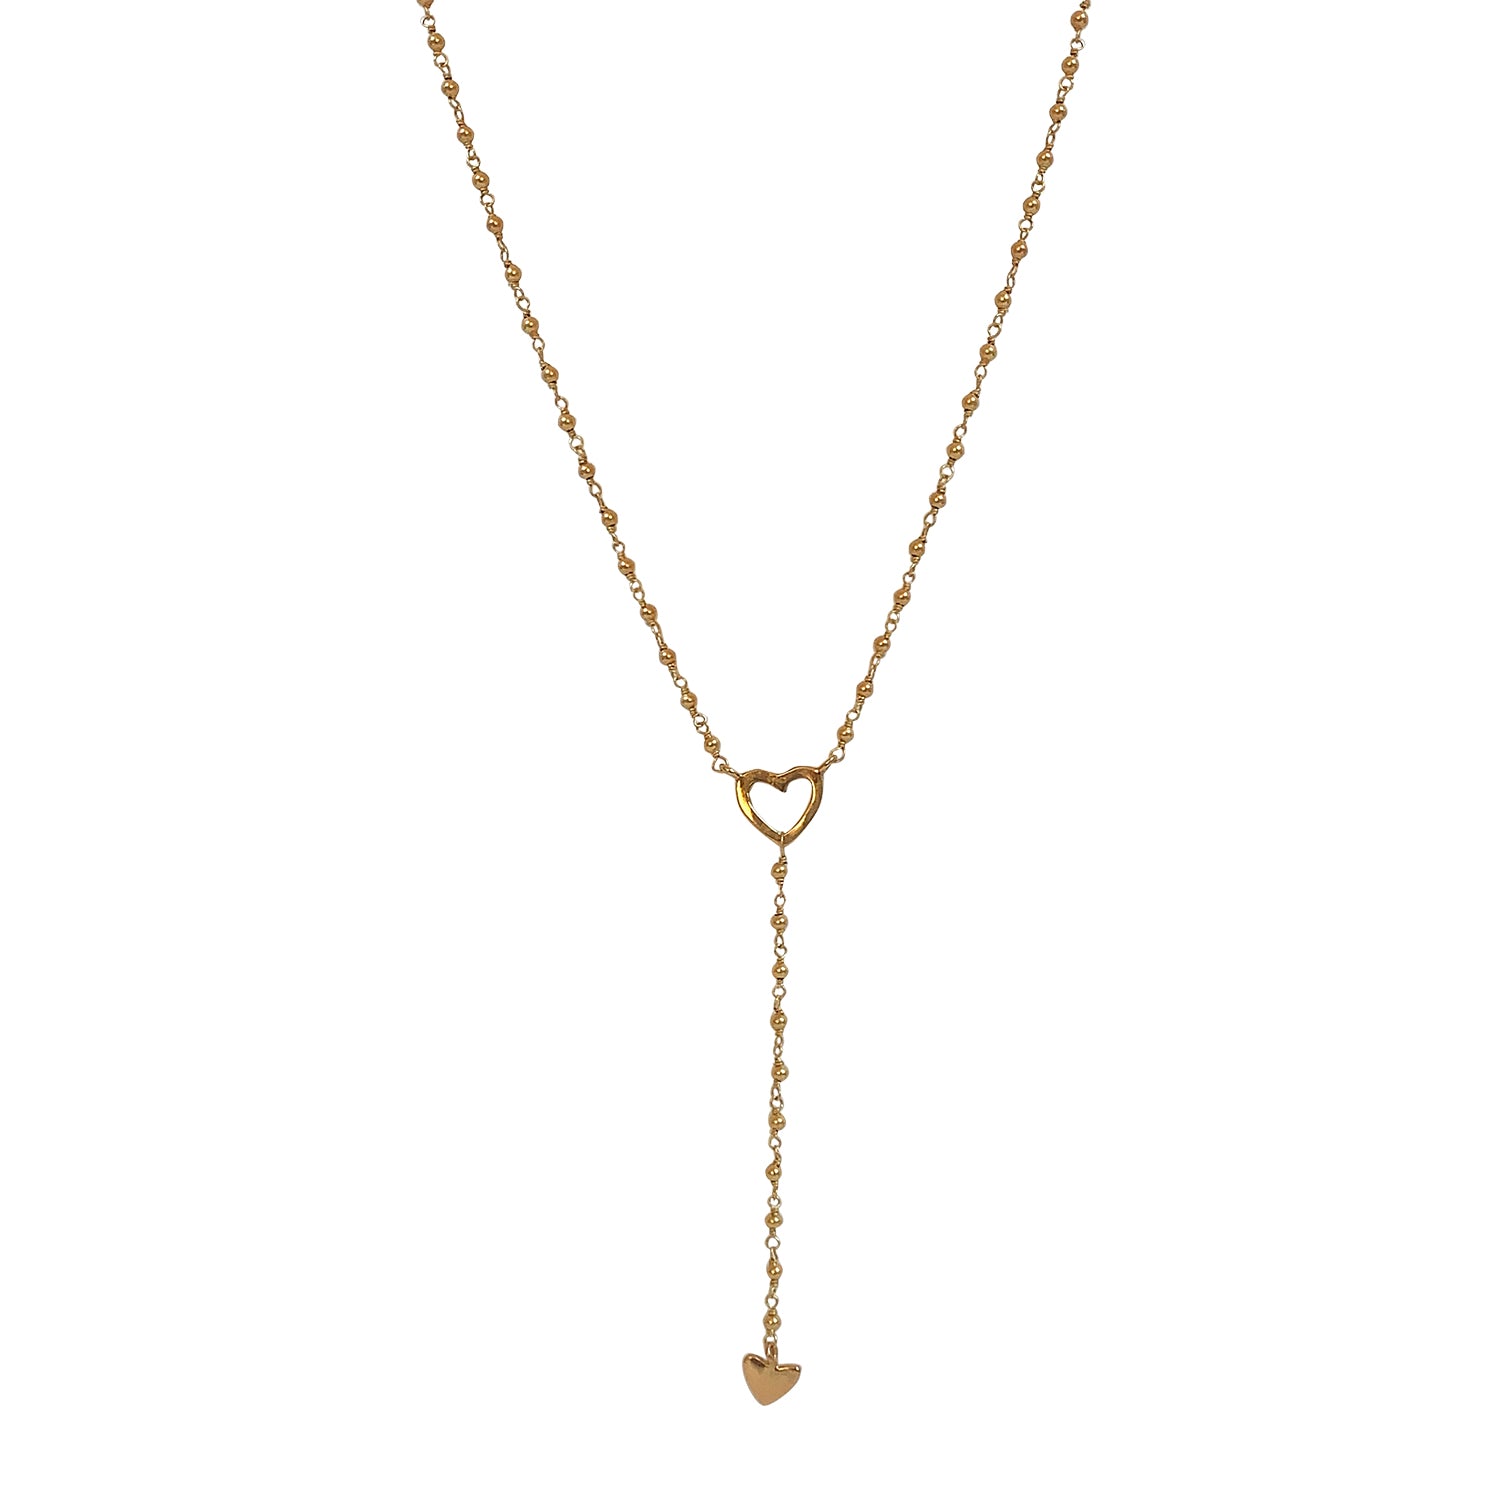 NECKLACE HEART DROP GOLD